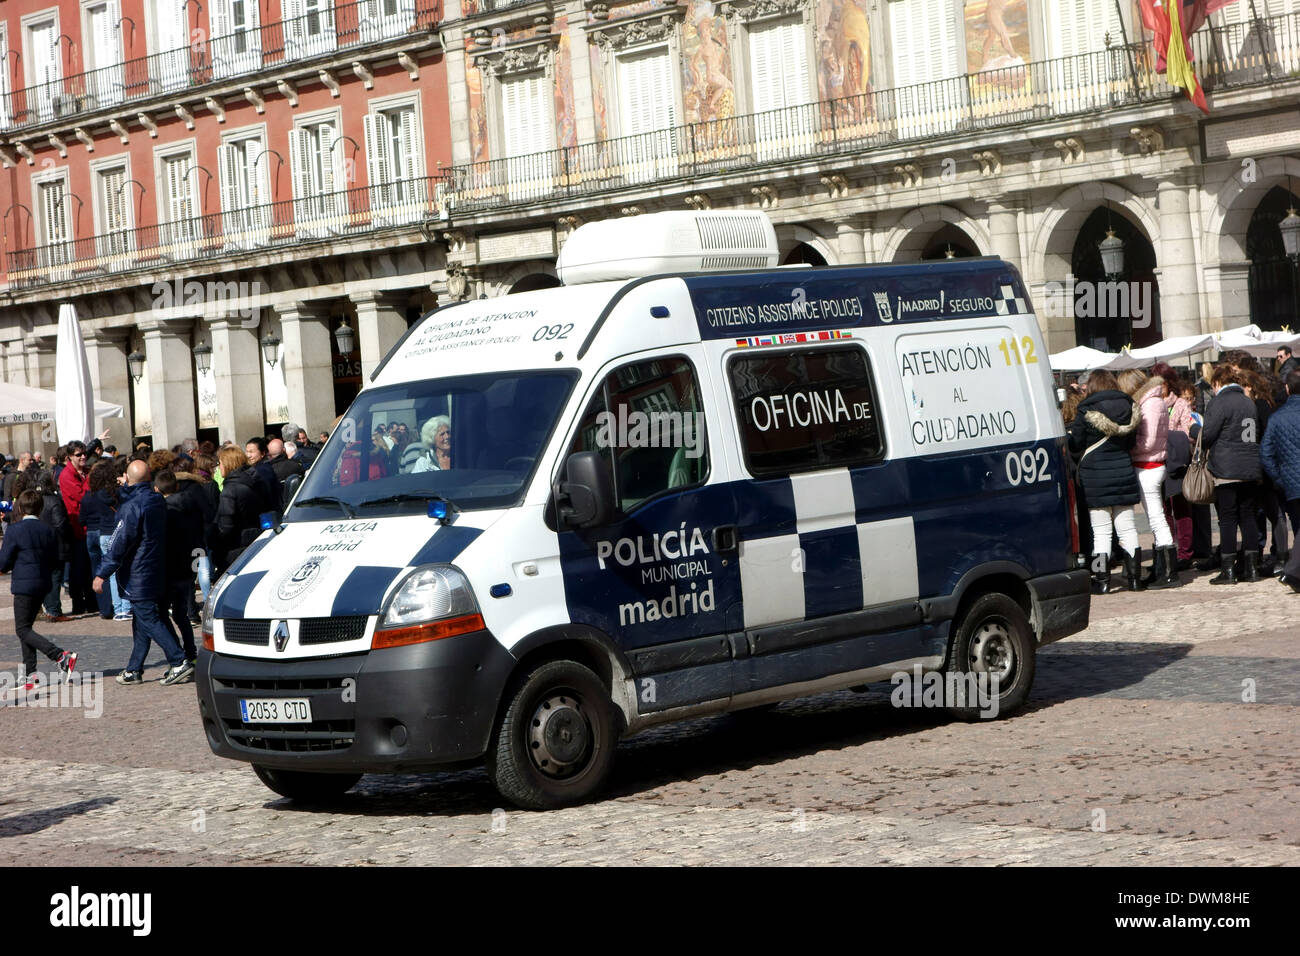 Municipal Police citizens' assistance van parked in Plaza Mayor, Madrid, Spain Stock Photo